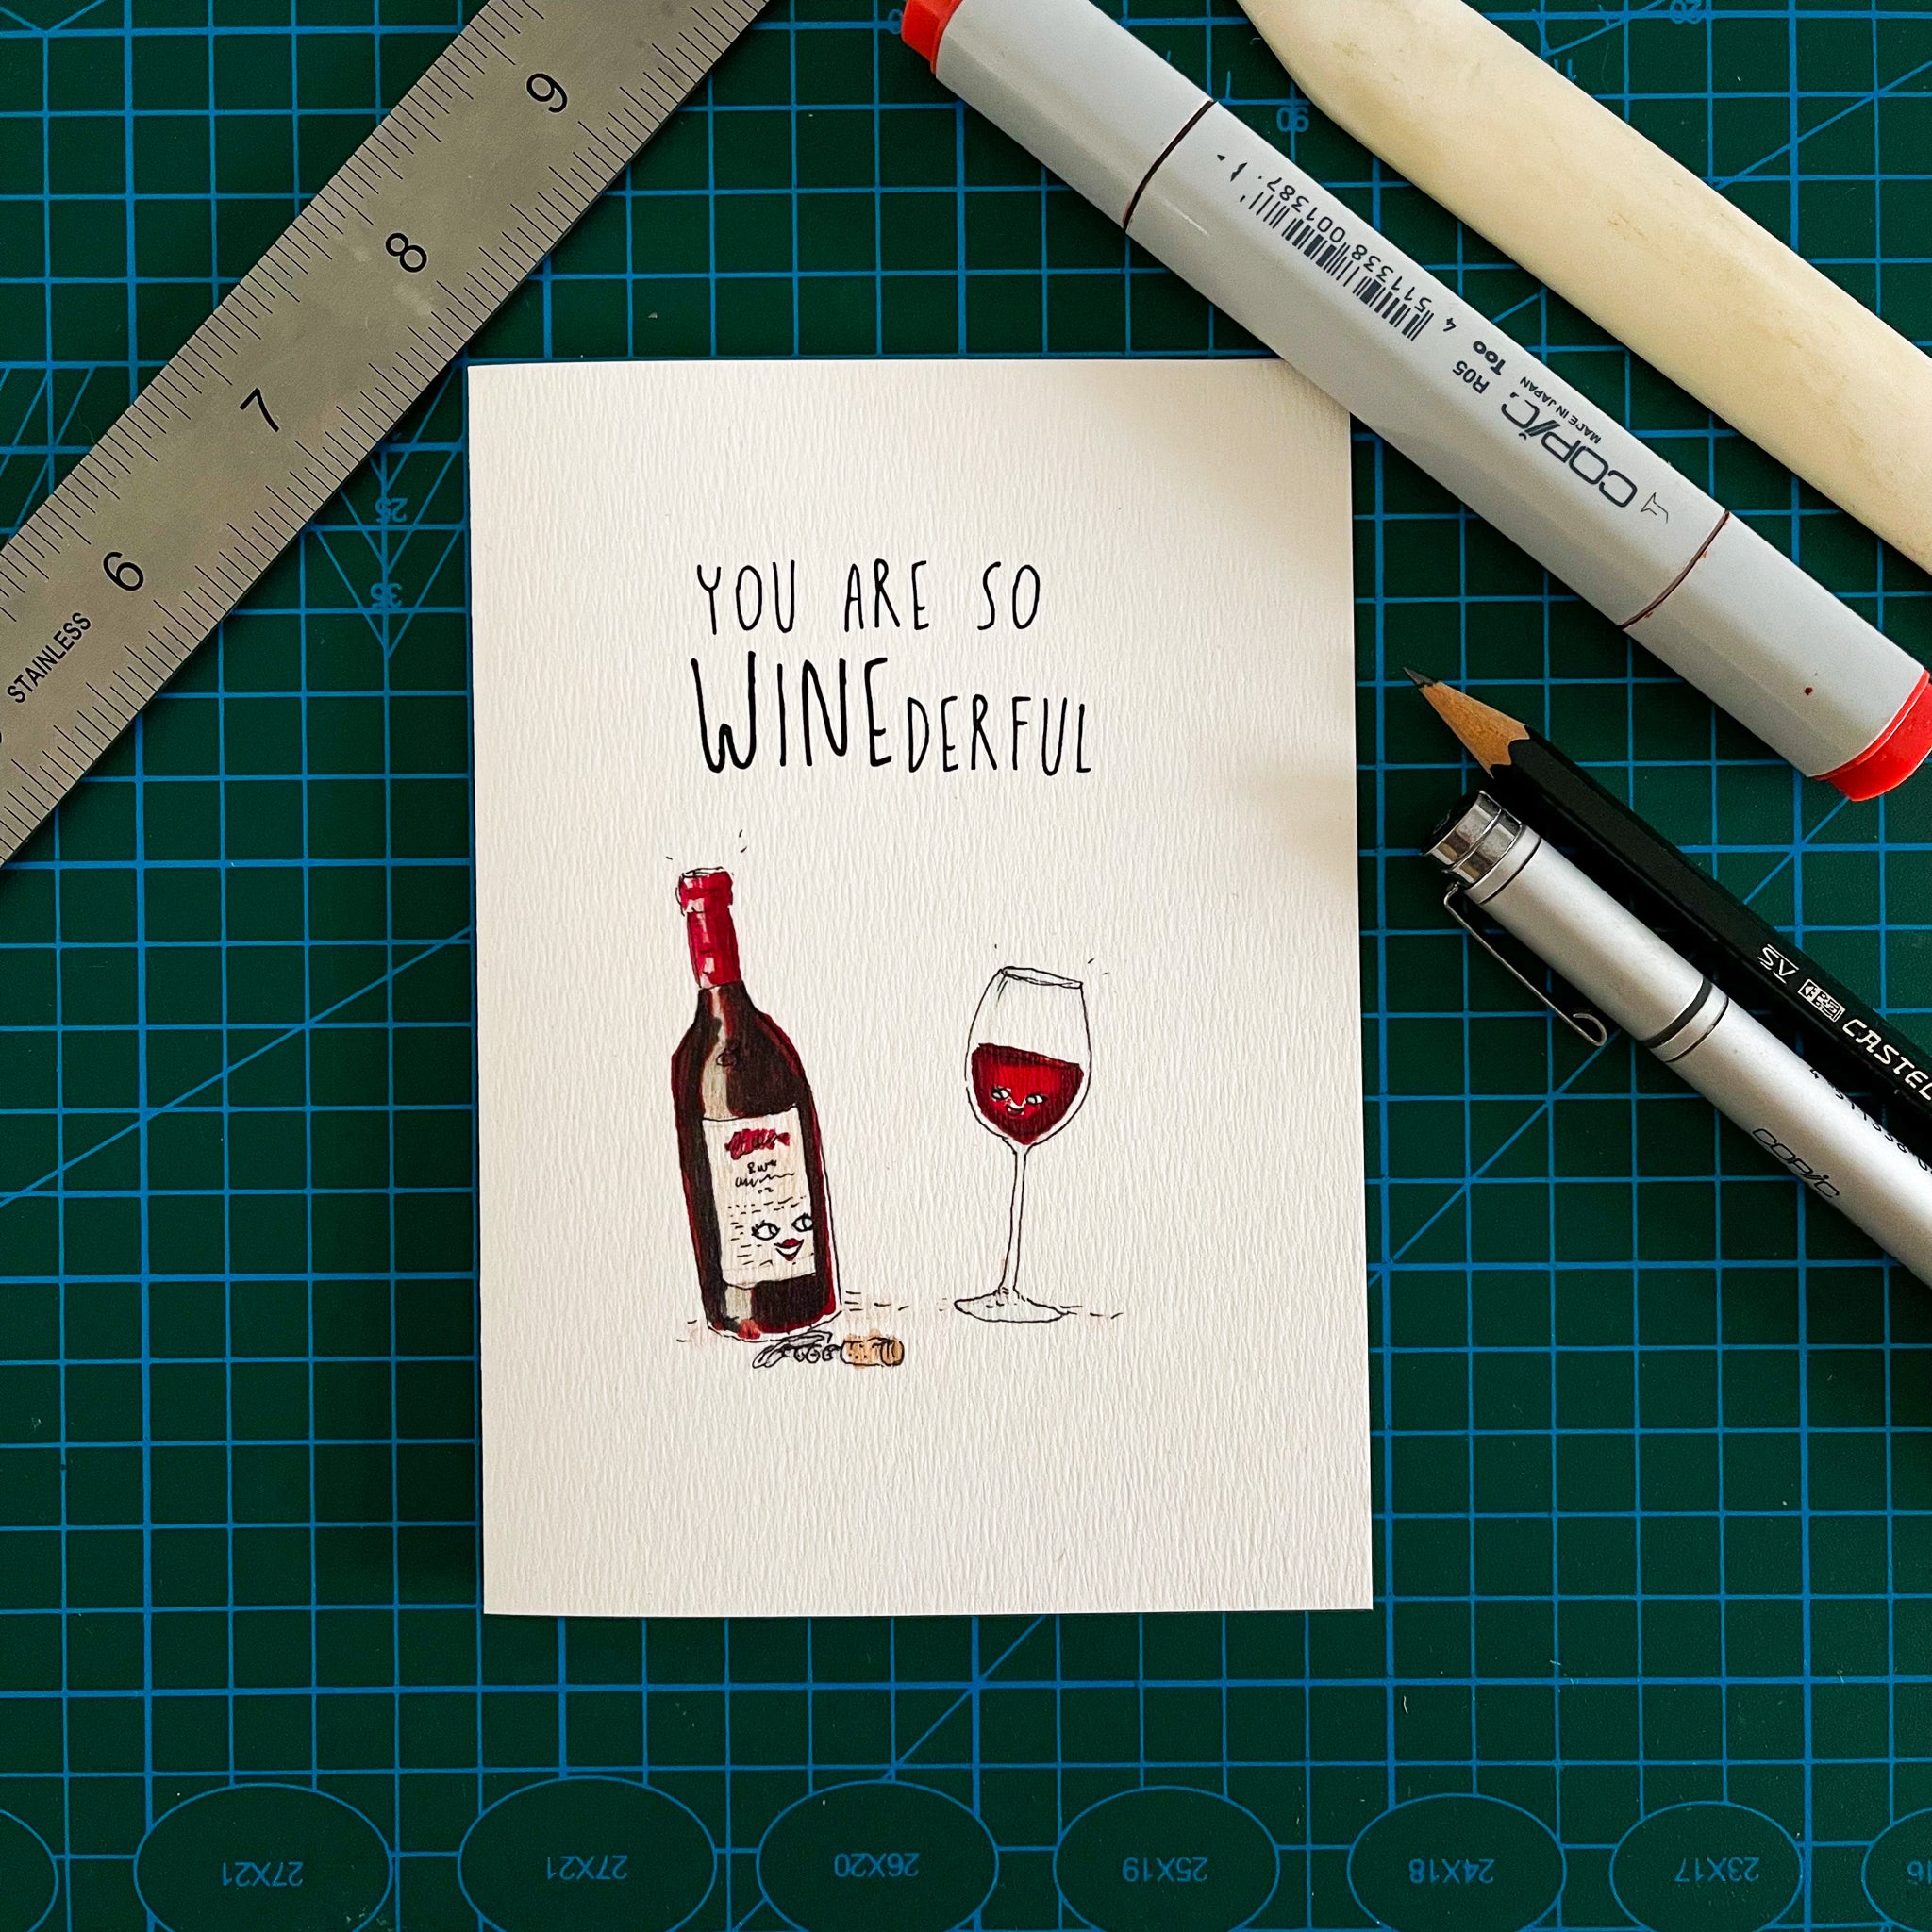 You Are So Winederful - Well Drawn